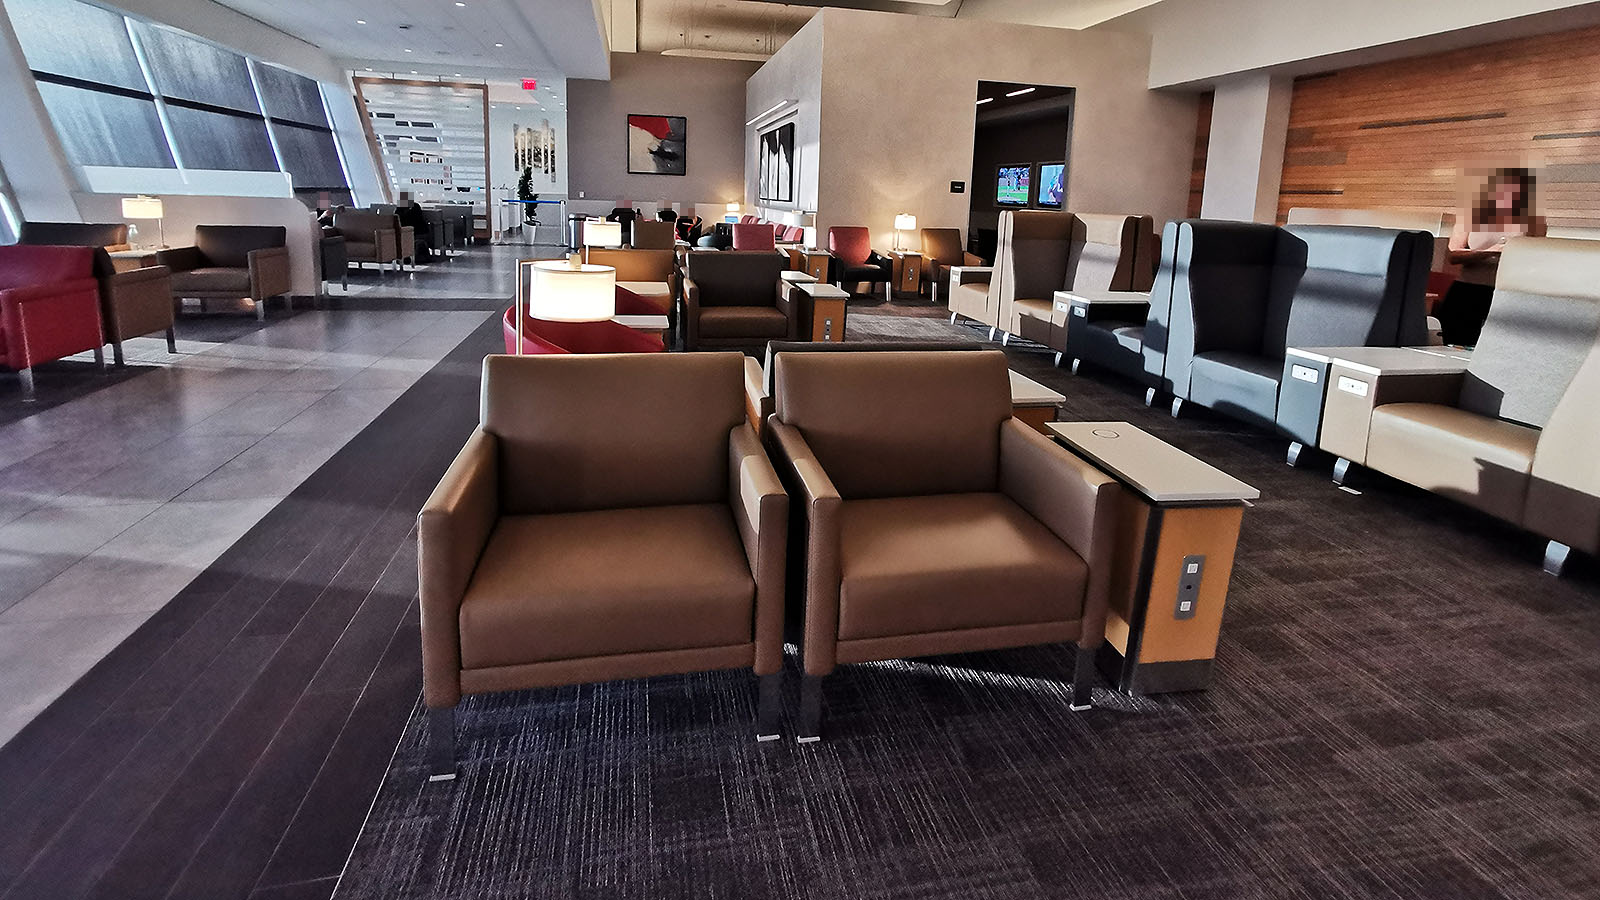 American Airlines Flagship Lounge, Dallas Fort Worth